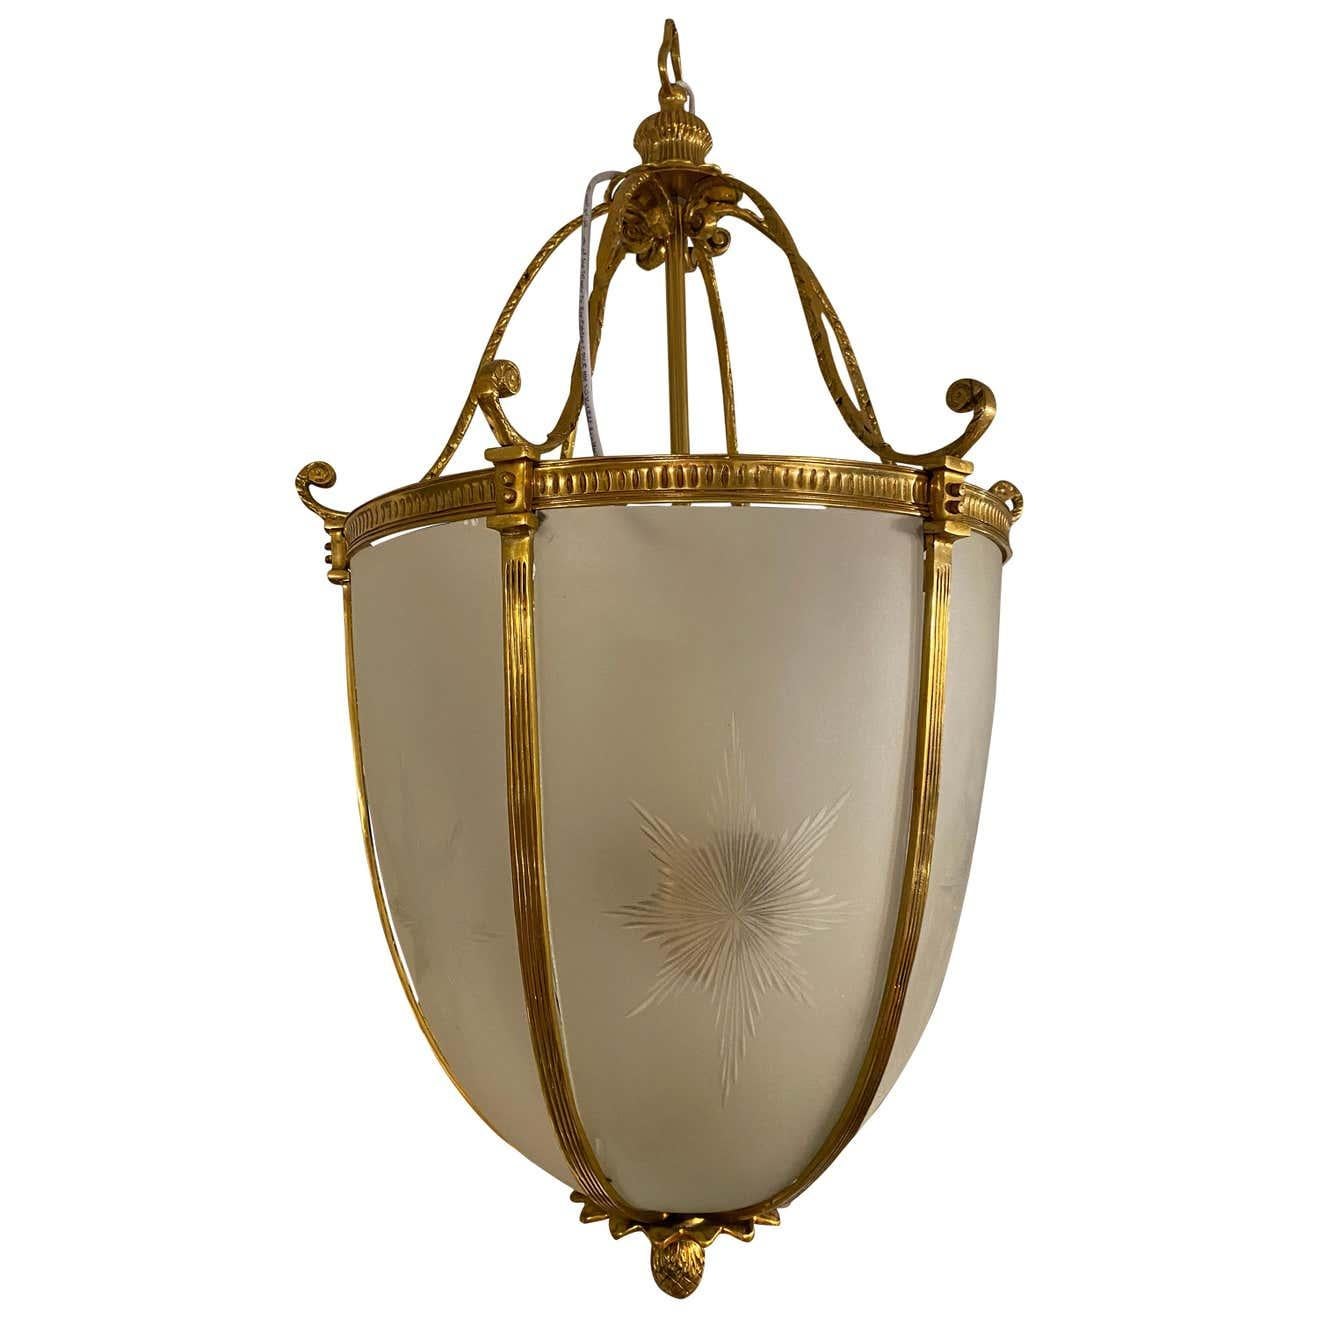 An impressive 20th century large hanging frosted glass and ormolu lantern. Each panel is etched with star burst and bowed panels. Excellent for home use.